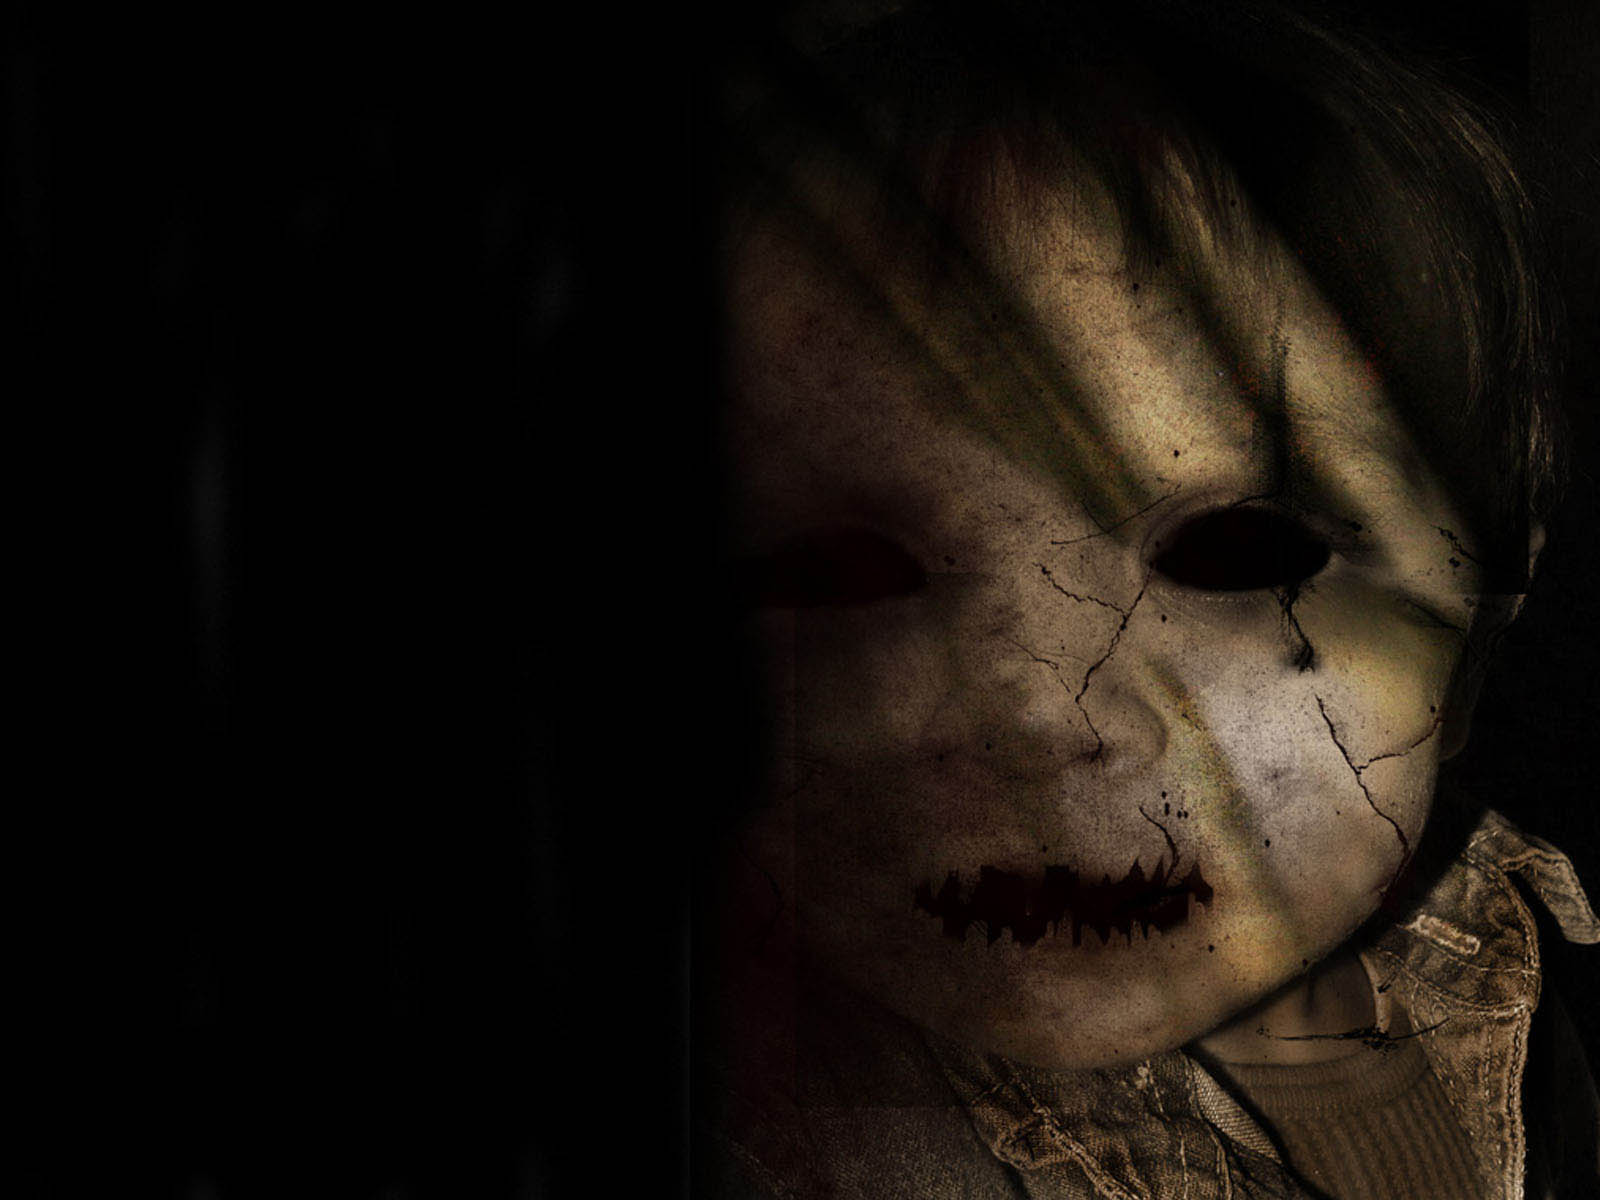 Free download wallpaper Scary Horror Wallpaper [1600x1200] for your Desktop, Mobile & Tablet. Explore Spooky Wallpaper. Scary Wallpaper For Desktop, Free Scary Halloween Wallpaper Downloads, Creepy Halloween Wallpaper for Desktop